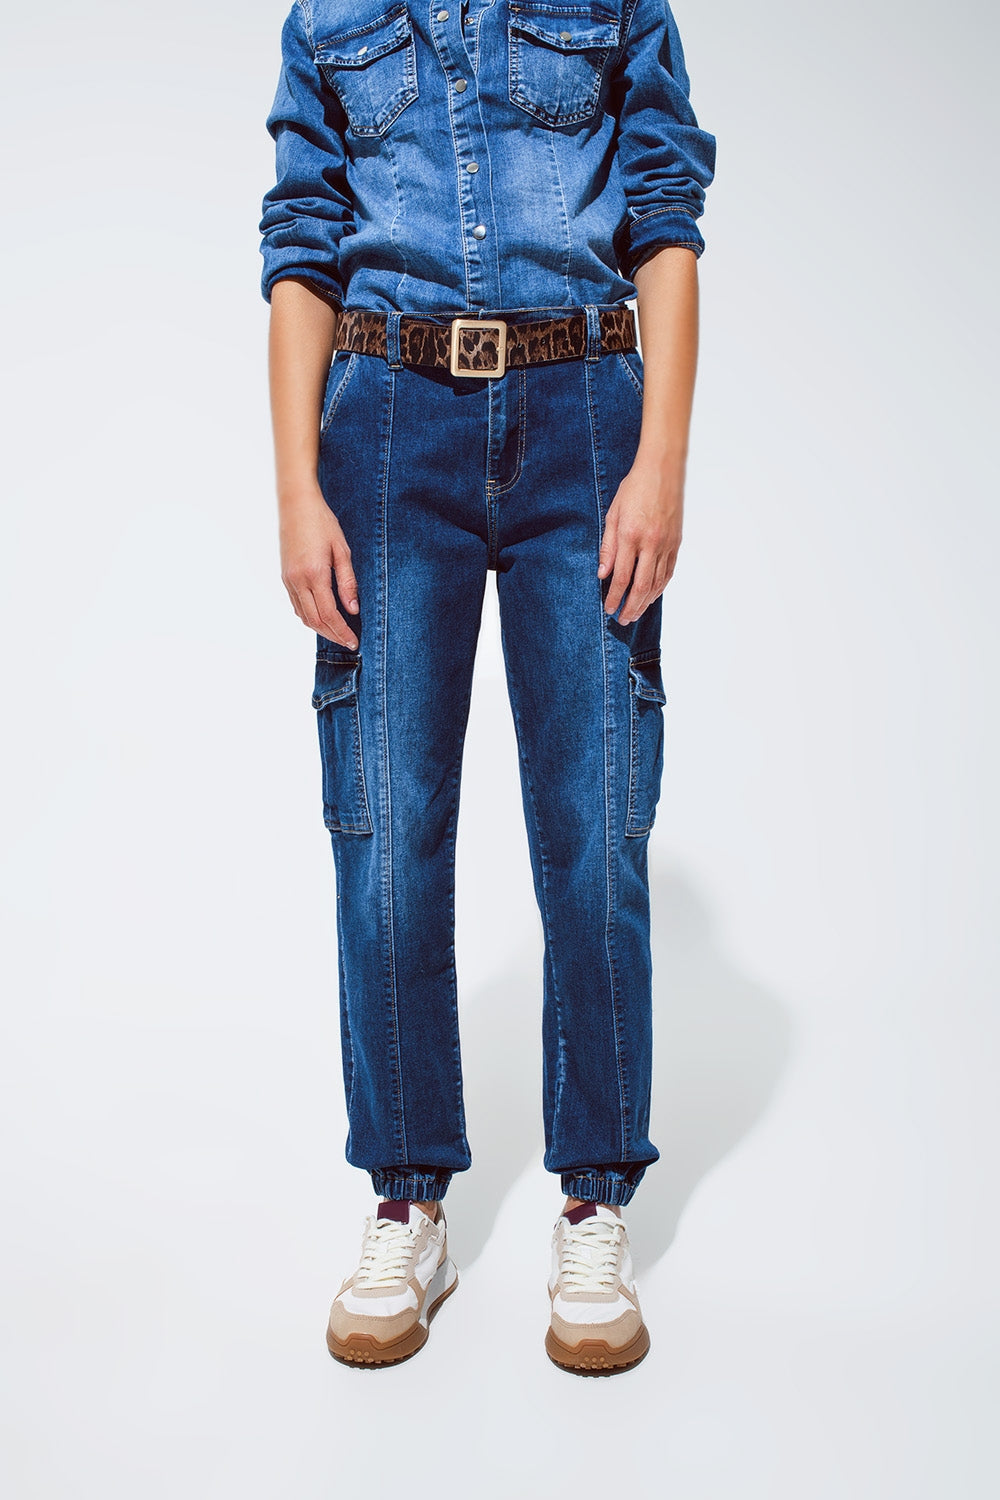 Q2 Cargo Style Jeans with Seam Down the Front in Medium Wash